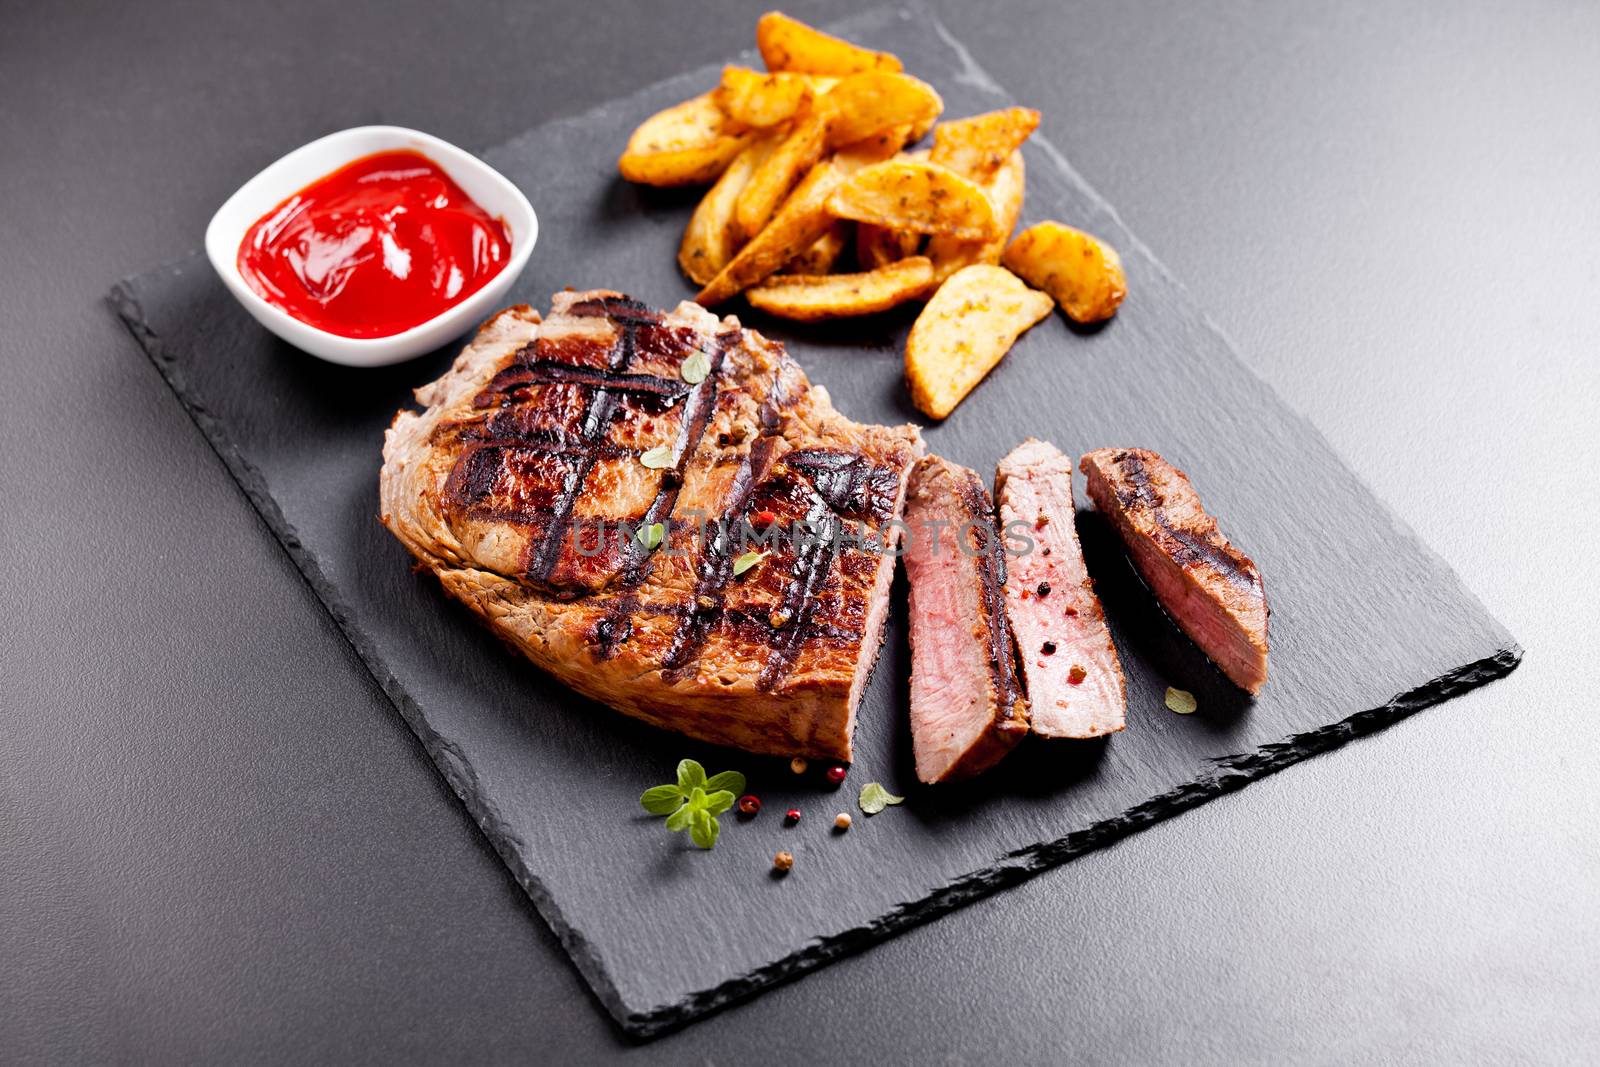 Platter Of Grilled Steak With Potatoes And Ketchup by mpessaris